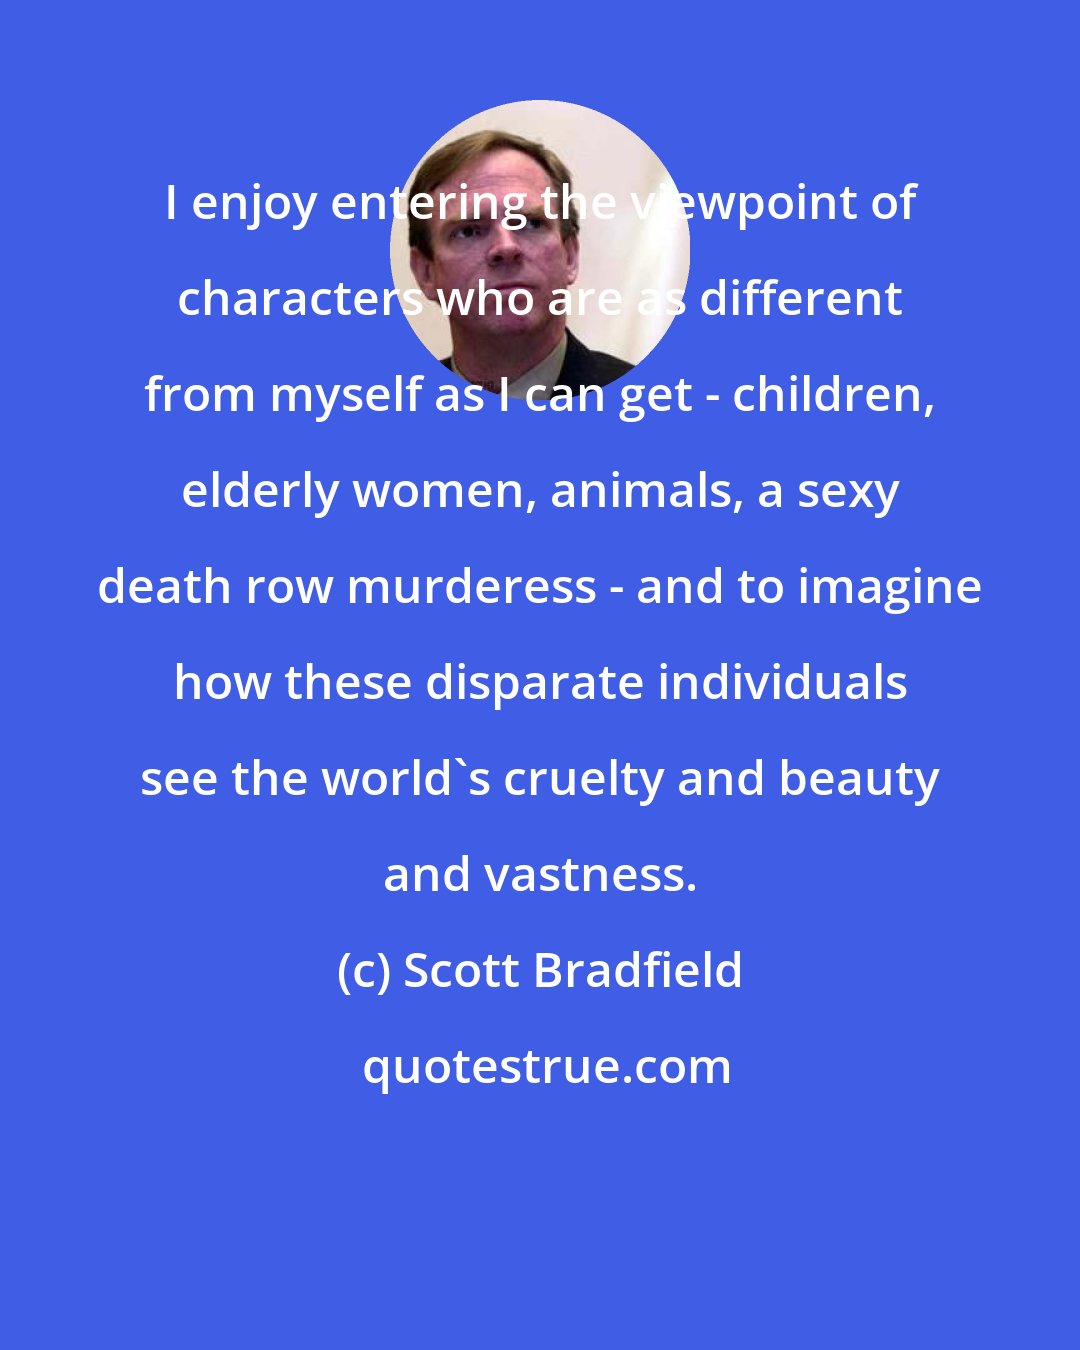 Scott Bradfield: I enjoy entering the viewpoint of characters who are as different from myself as I can get - children, elderly women, animals, a sexy death row murderess - and to imagine how these disparate individuals see the world's cruelty and beauty and vastness.